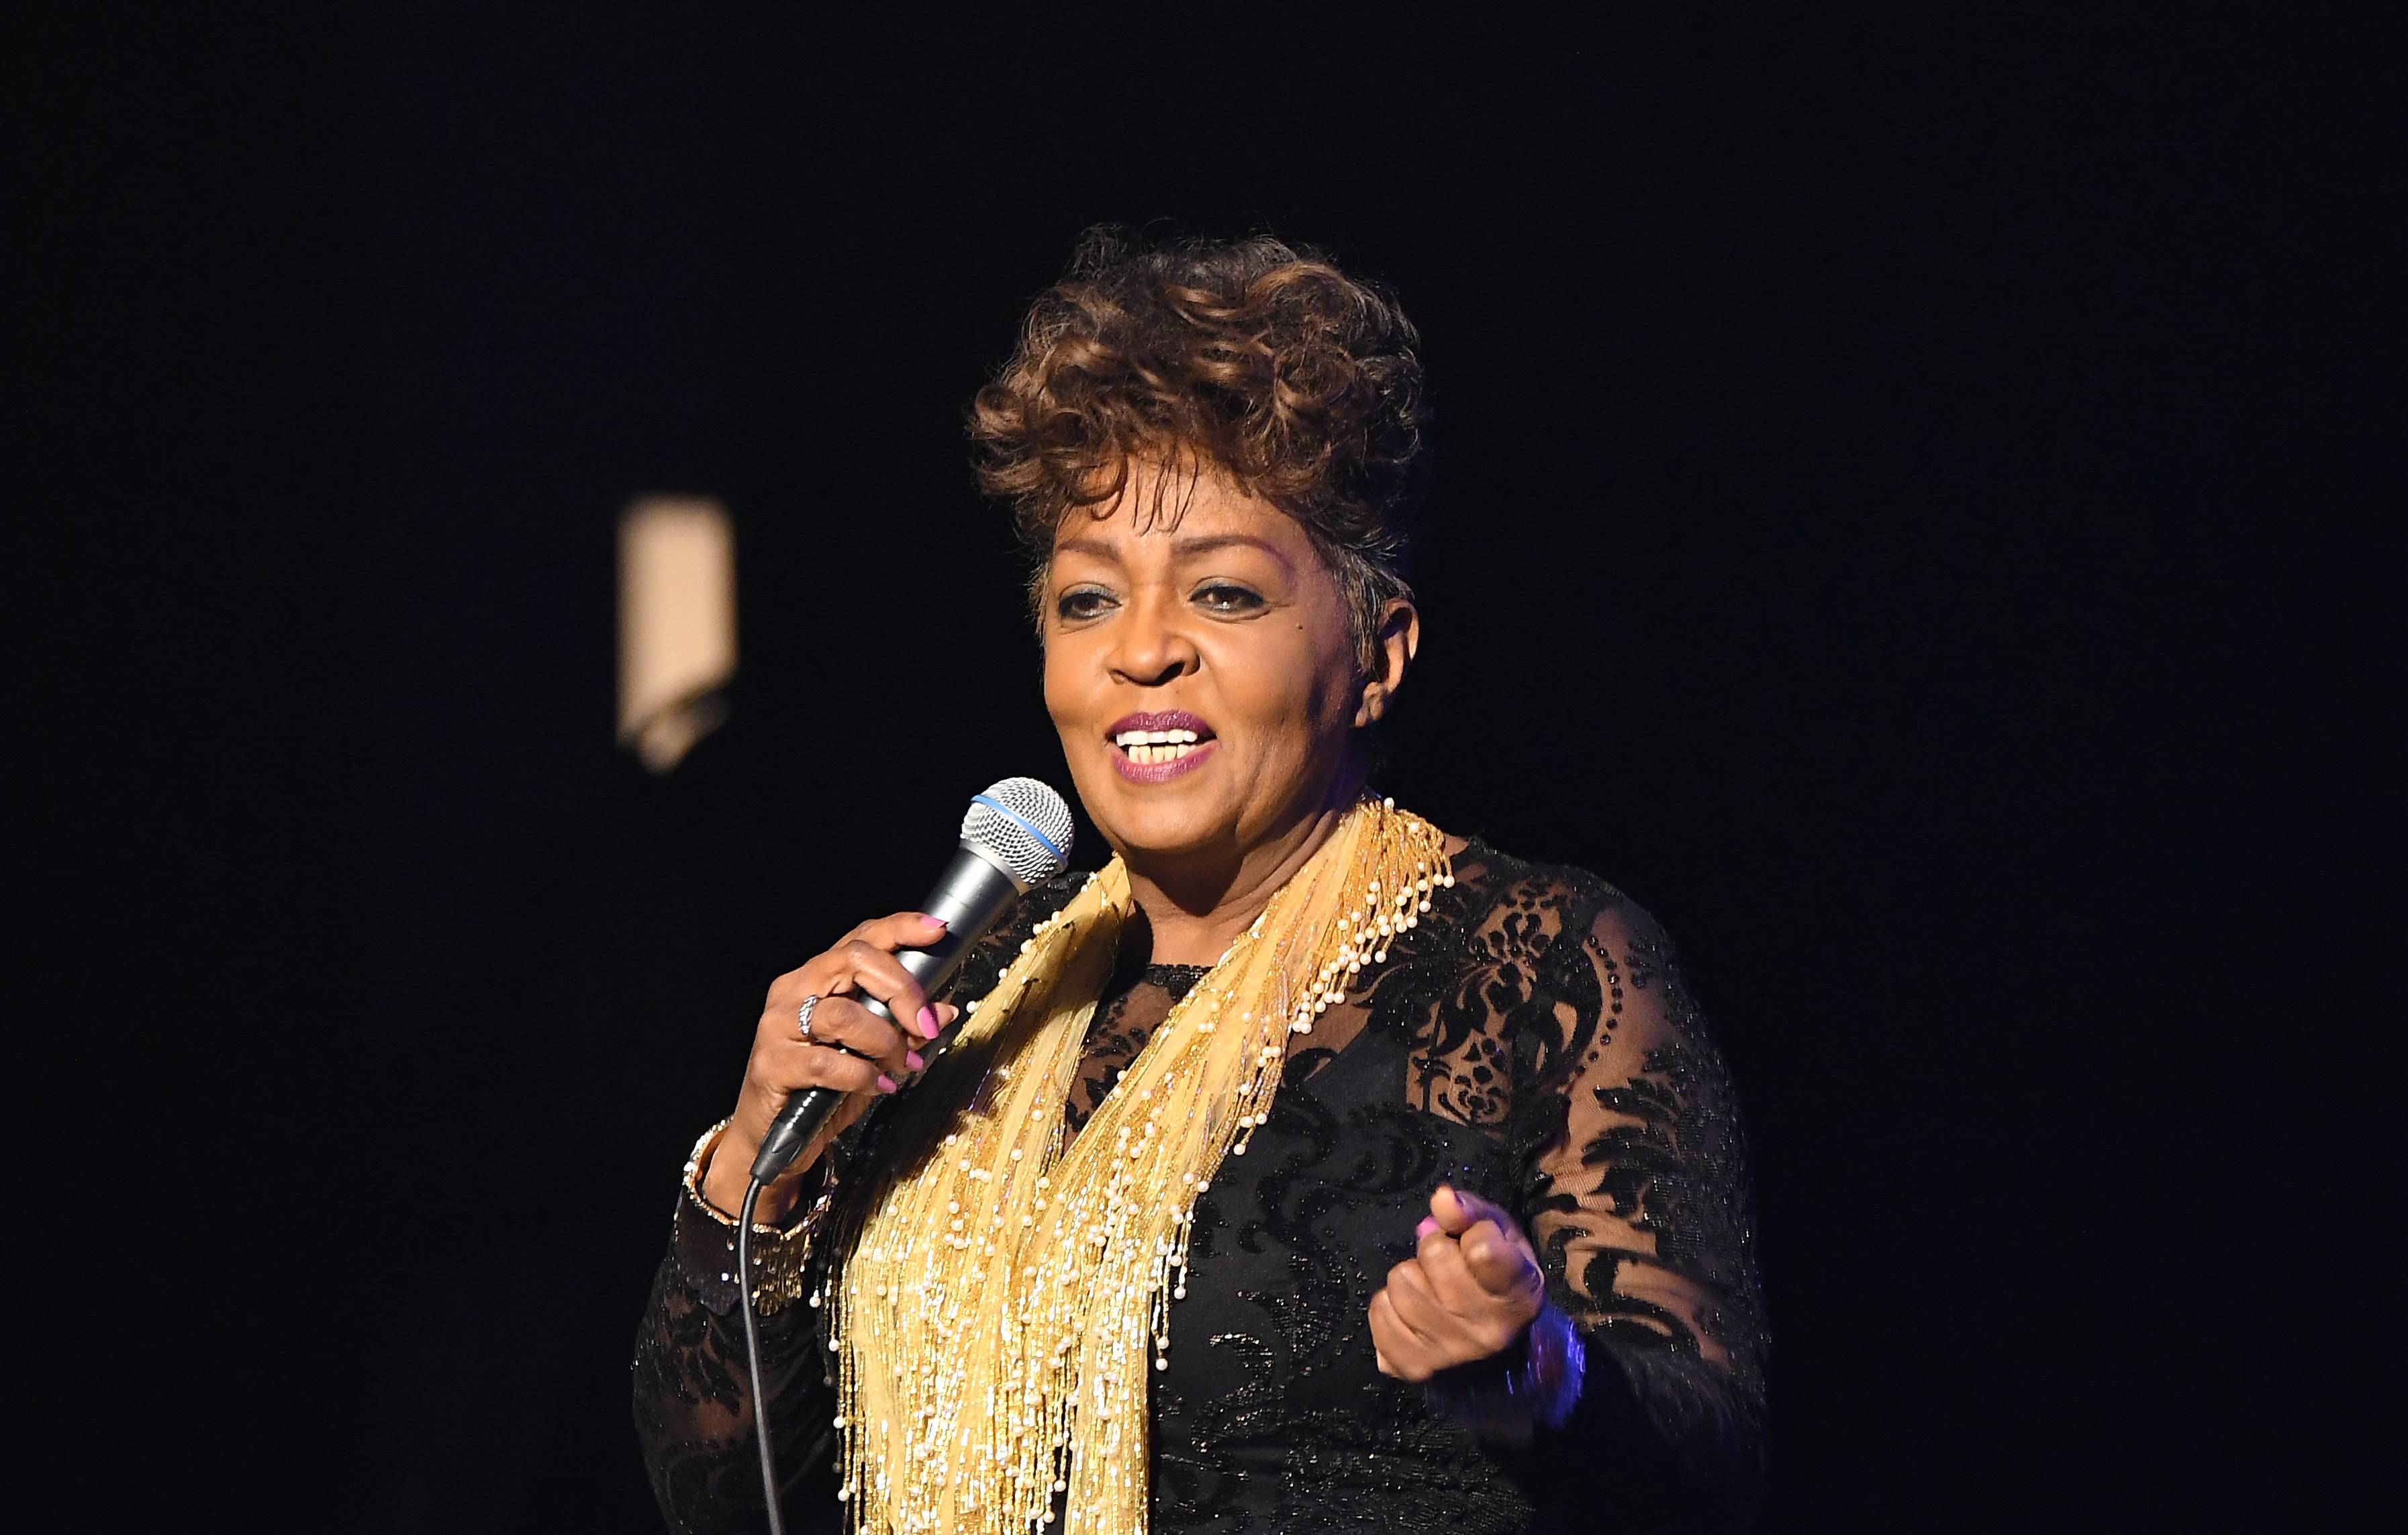 OXON HILL, MARYLAND - DECEMBER 05:  Singer Anita Baker onstage during 2019 Urban One Honors at MGM National Harbor on December 05, 2019 in Oxon Hill, Maryland. (Photo by Paras Griffin/Getty Images)